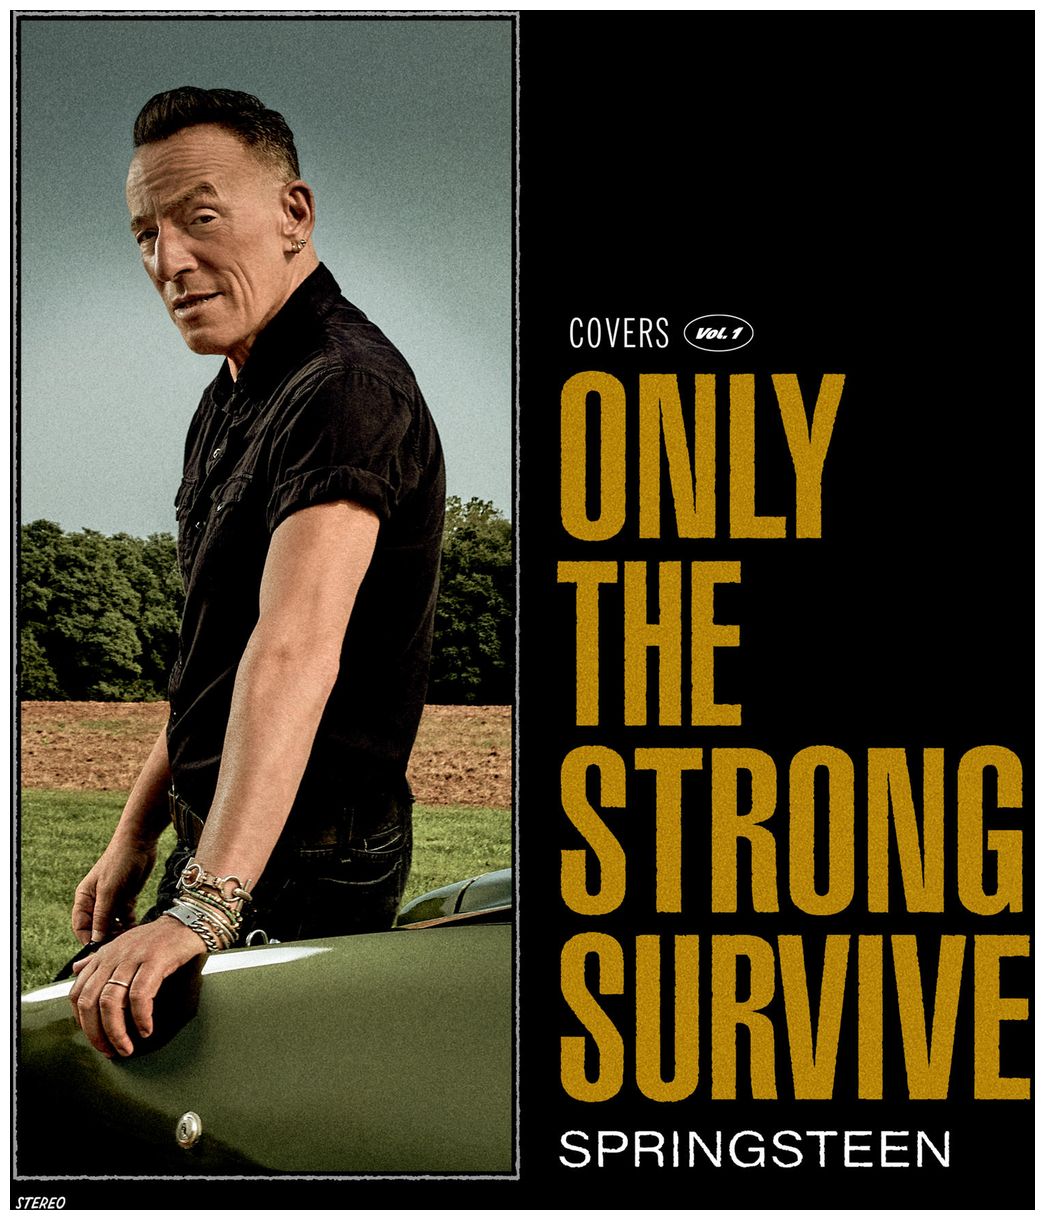 Bruce Springsteen - Only The Strong Survive (Covers Vol. 1) 